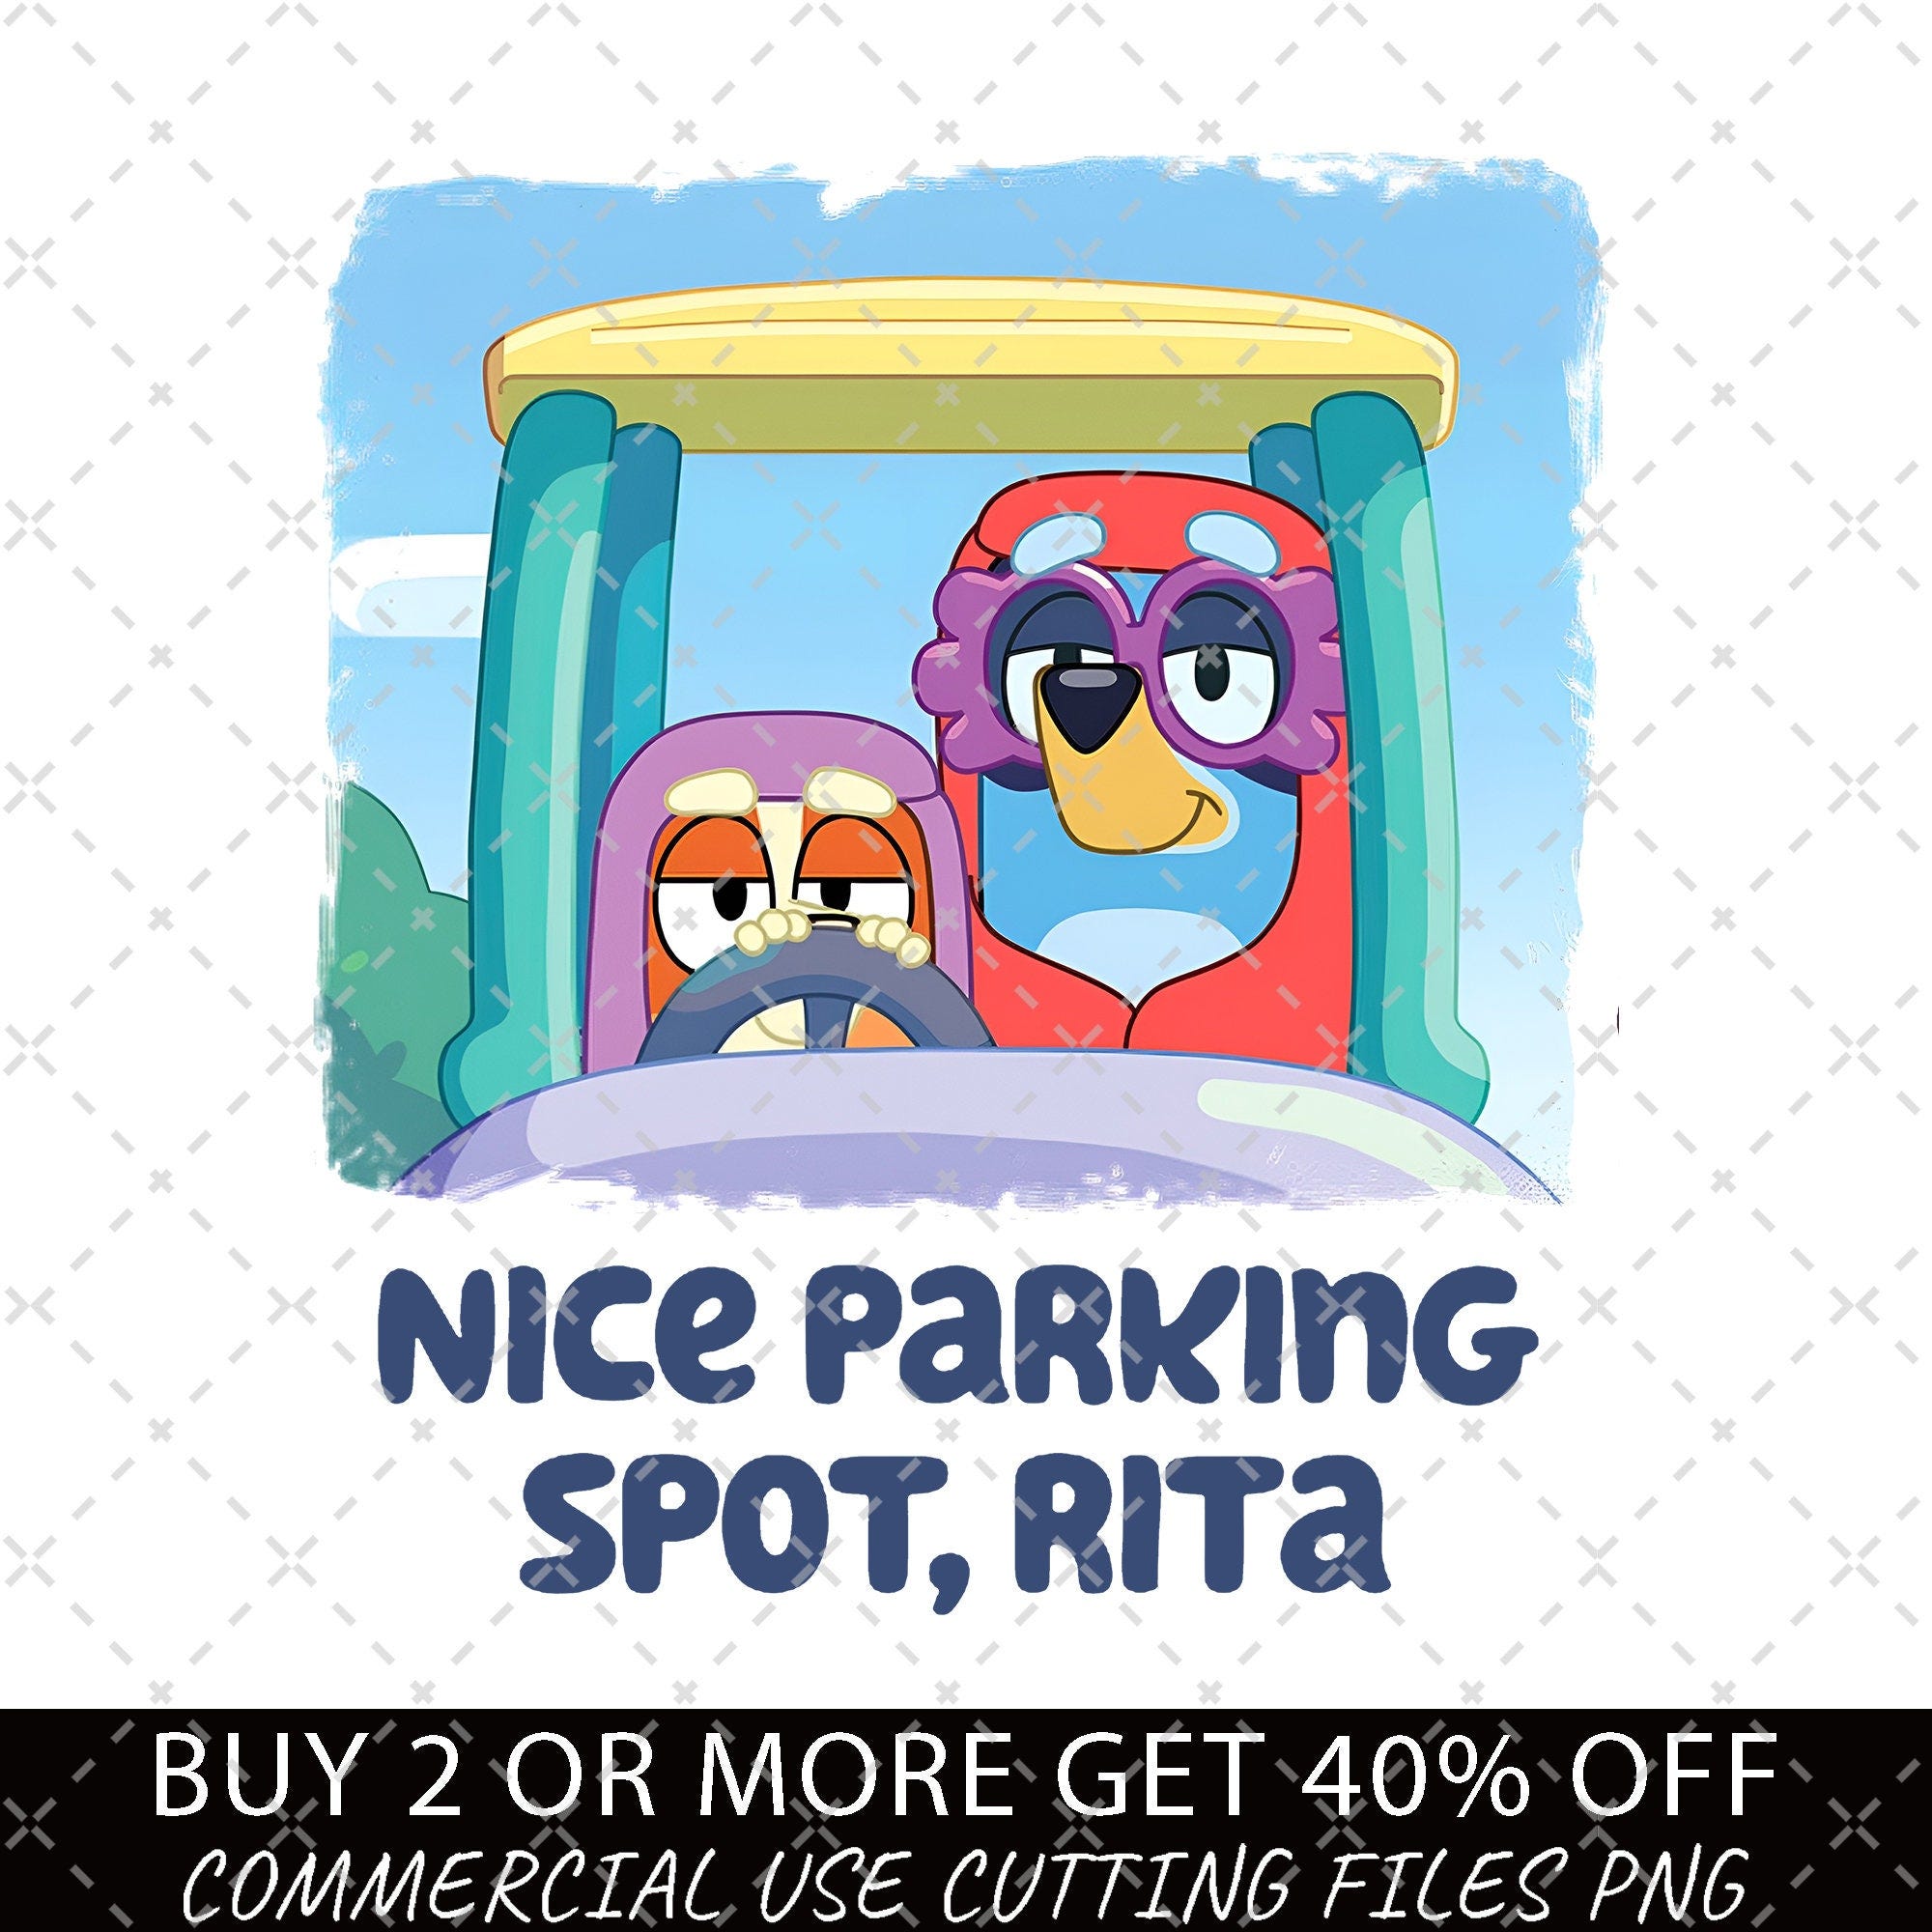 Bluey Png, Nice Parking Spot Rita PNG, Bluey Family Png, Decal Files, Vinyl Stickers, Car Image